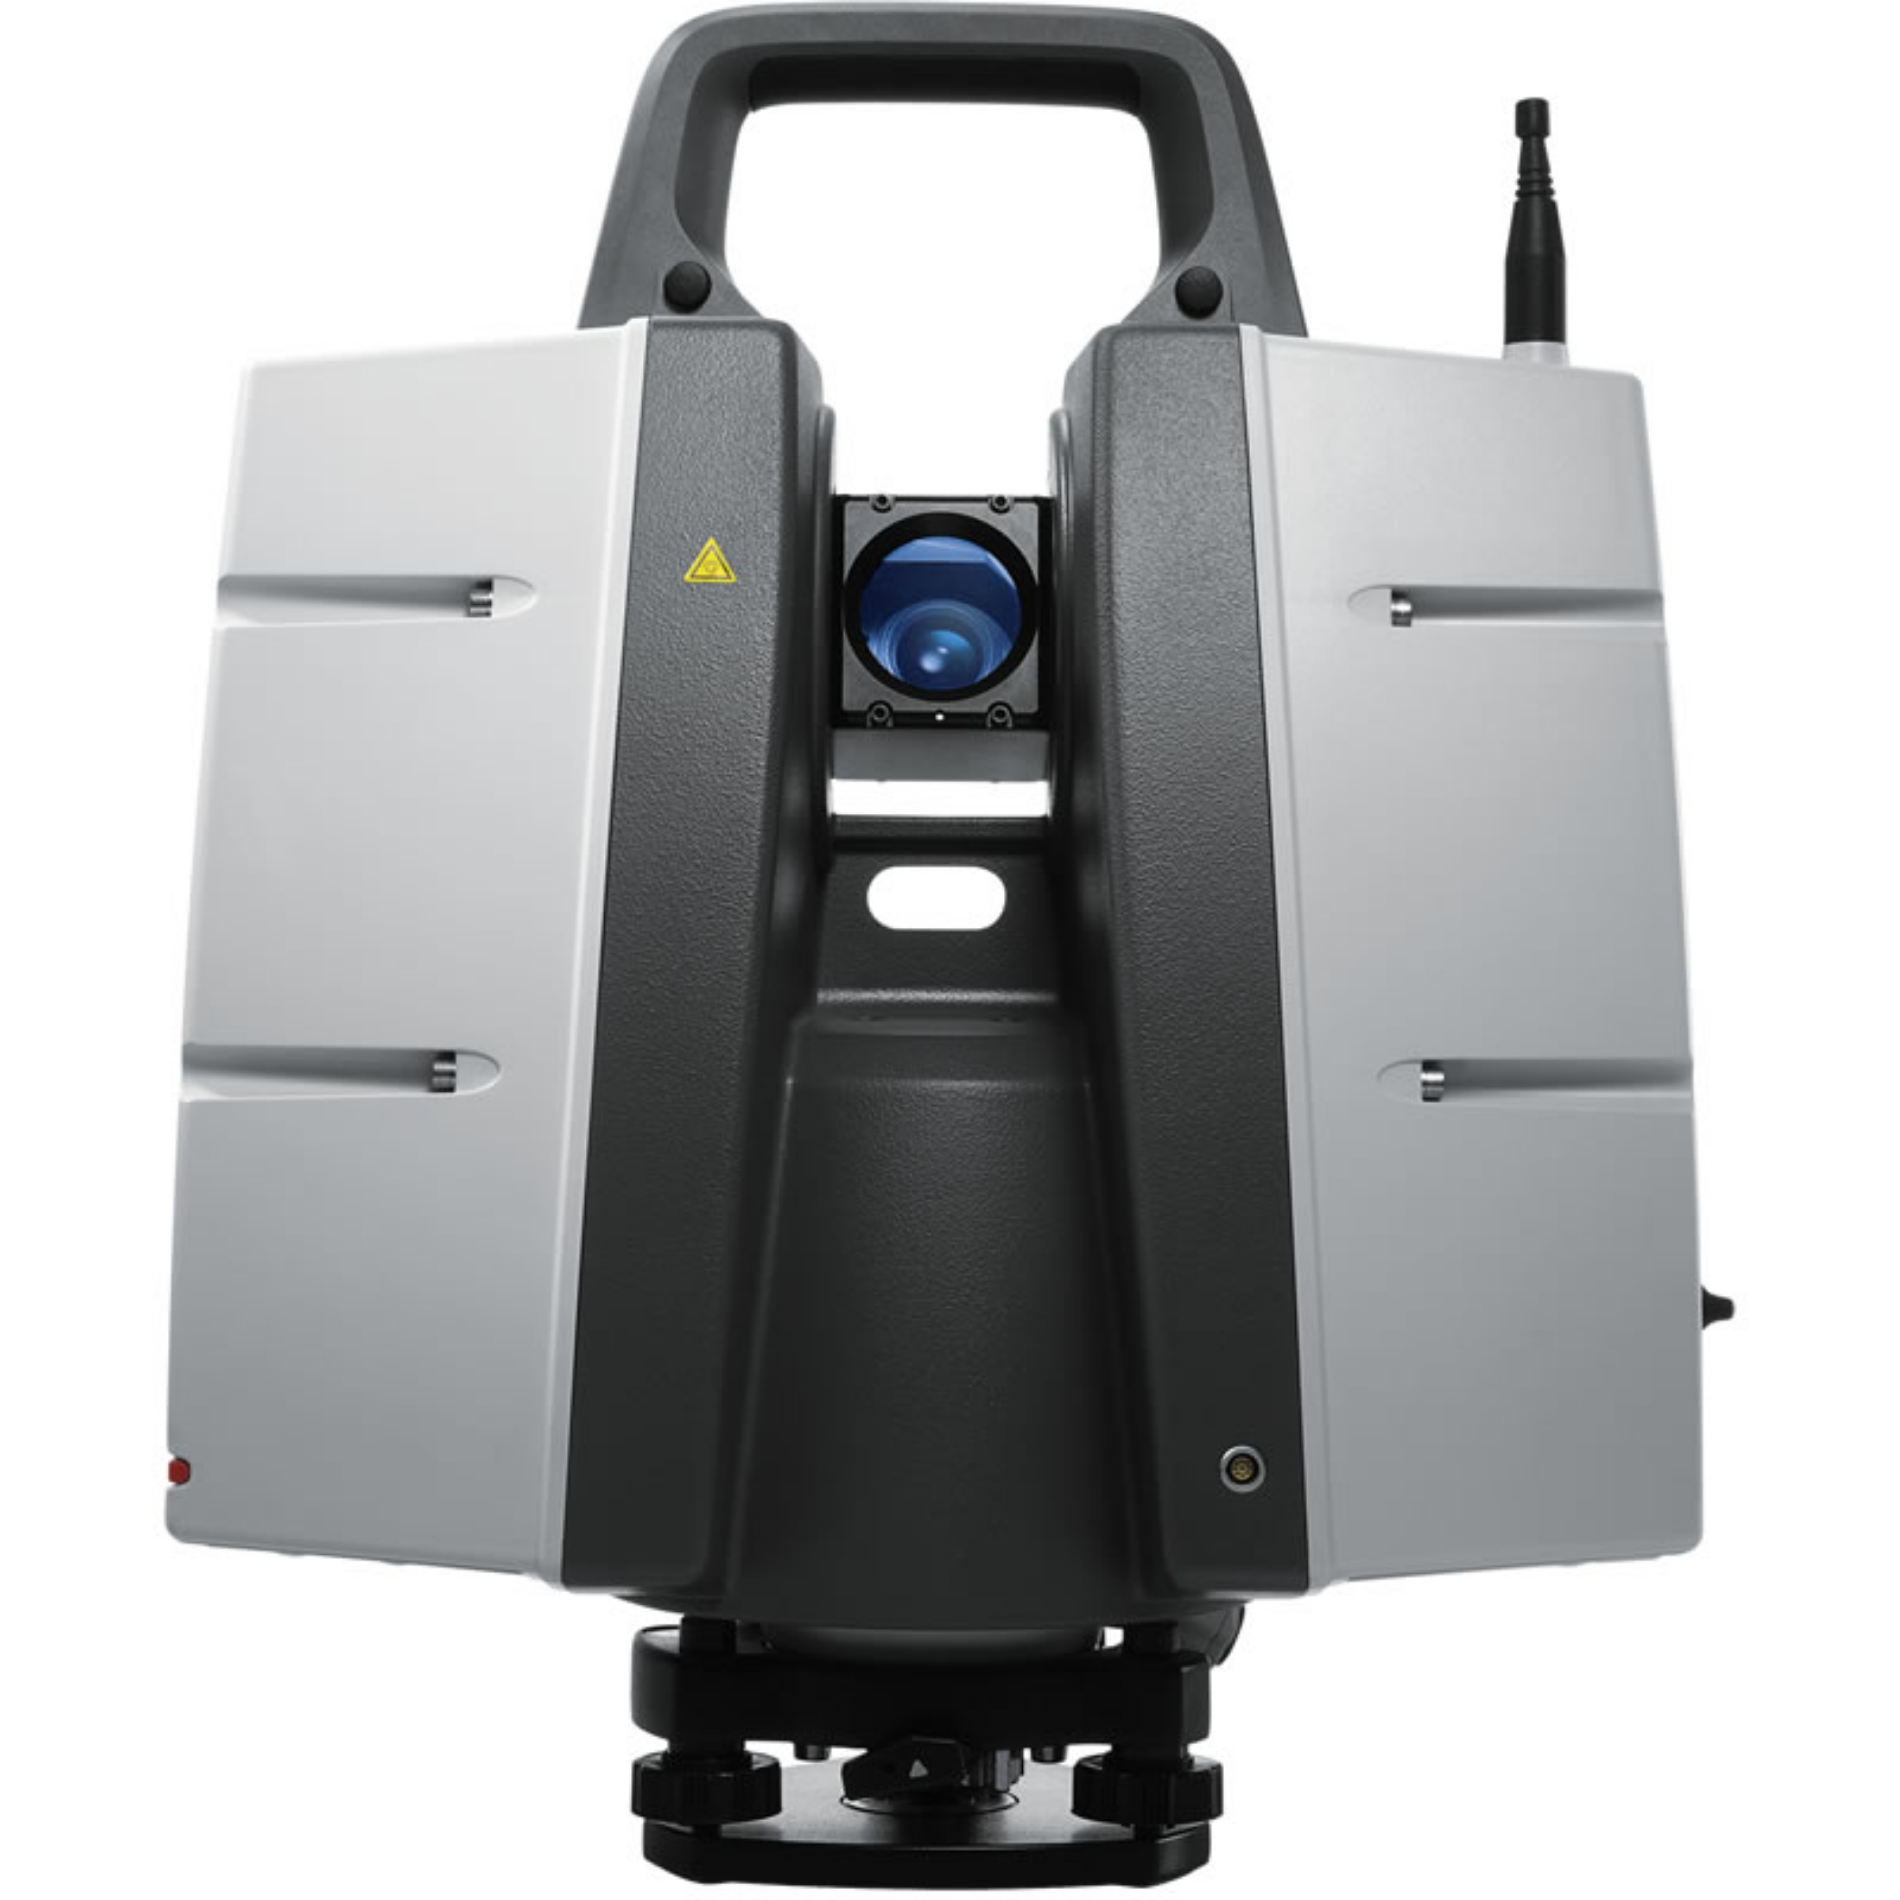 Picture of Leica ScanStation P30 3D Laser Scanner